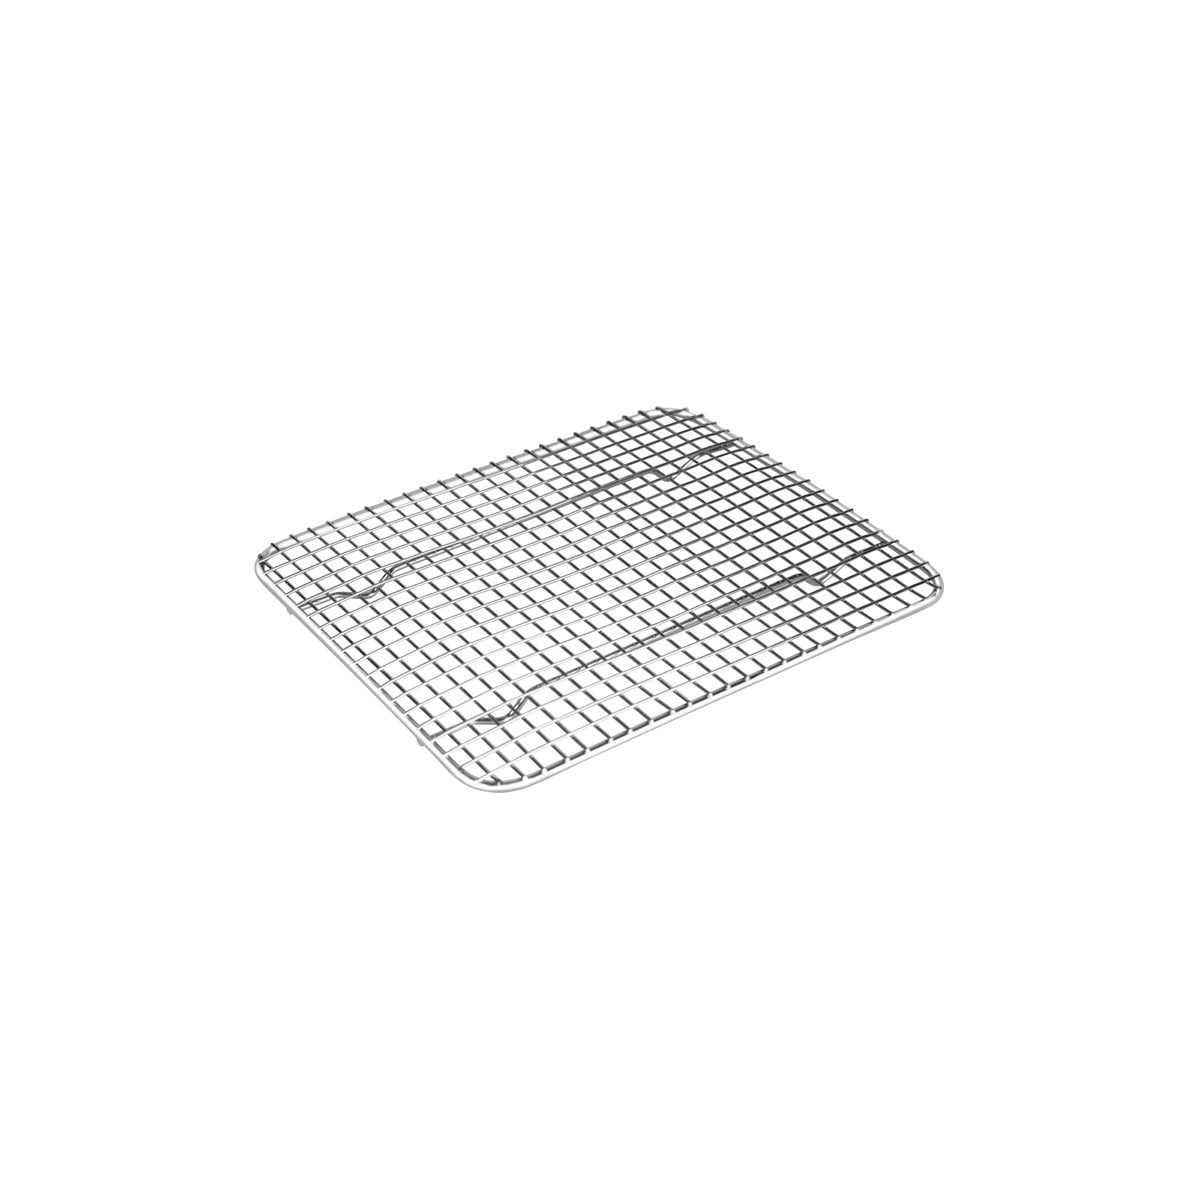 10308 Chef Inox Cake Cooler with Legs 1/2 Size 200x250mm Tomkin Australia Hospitality Supplies